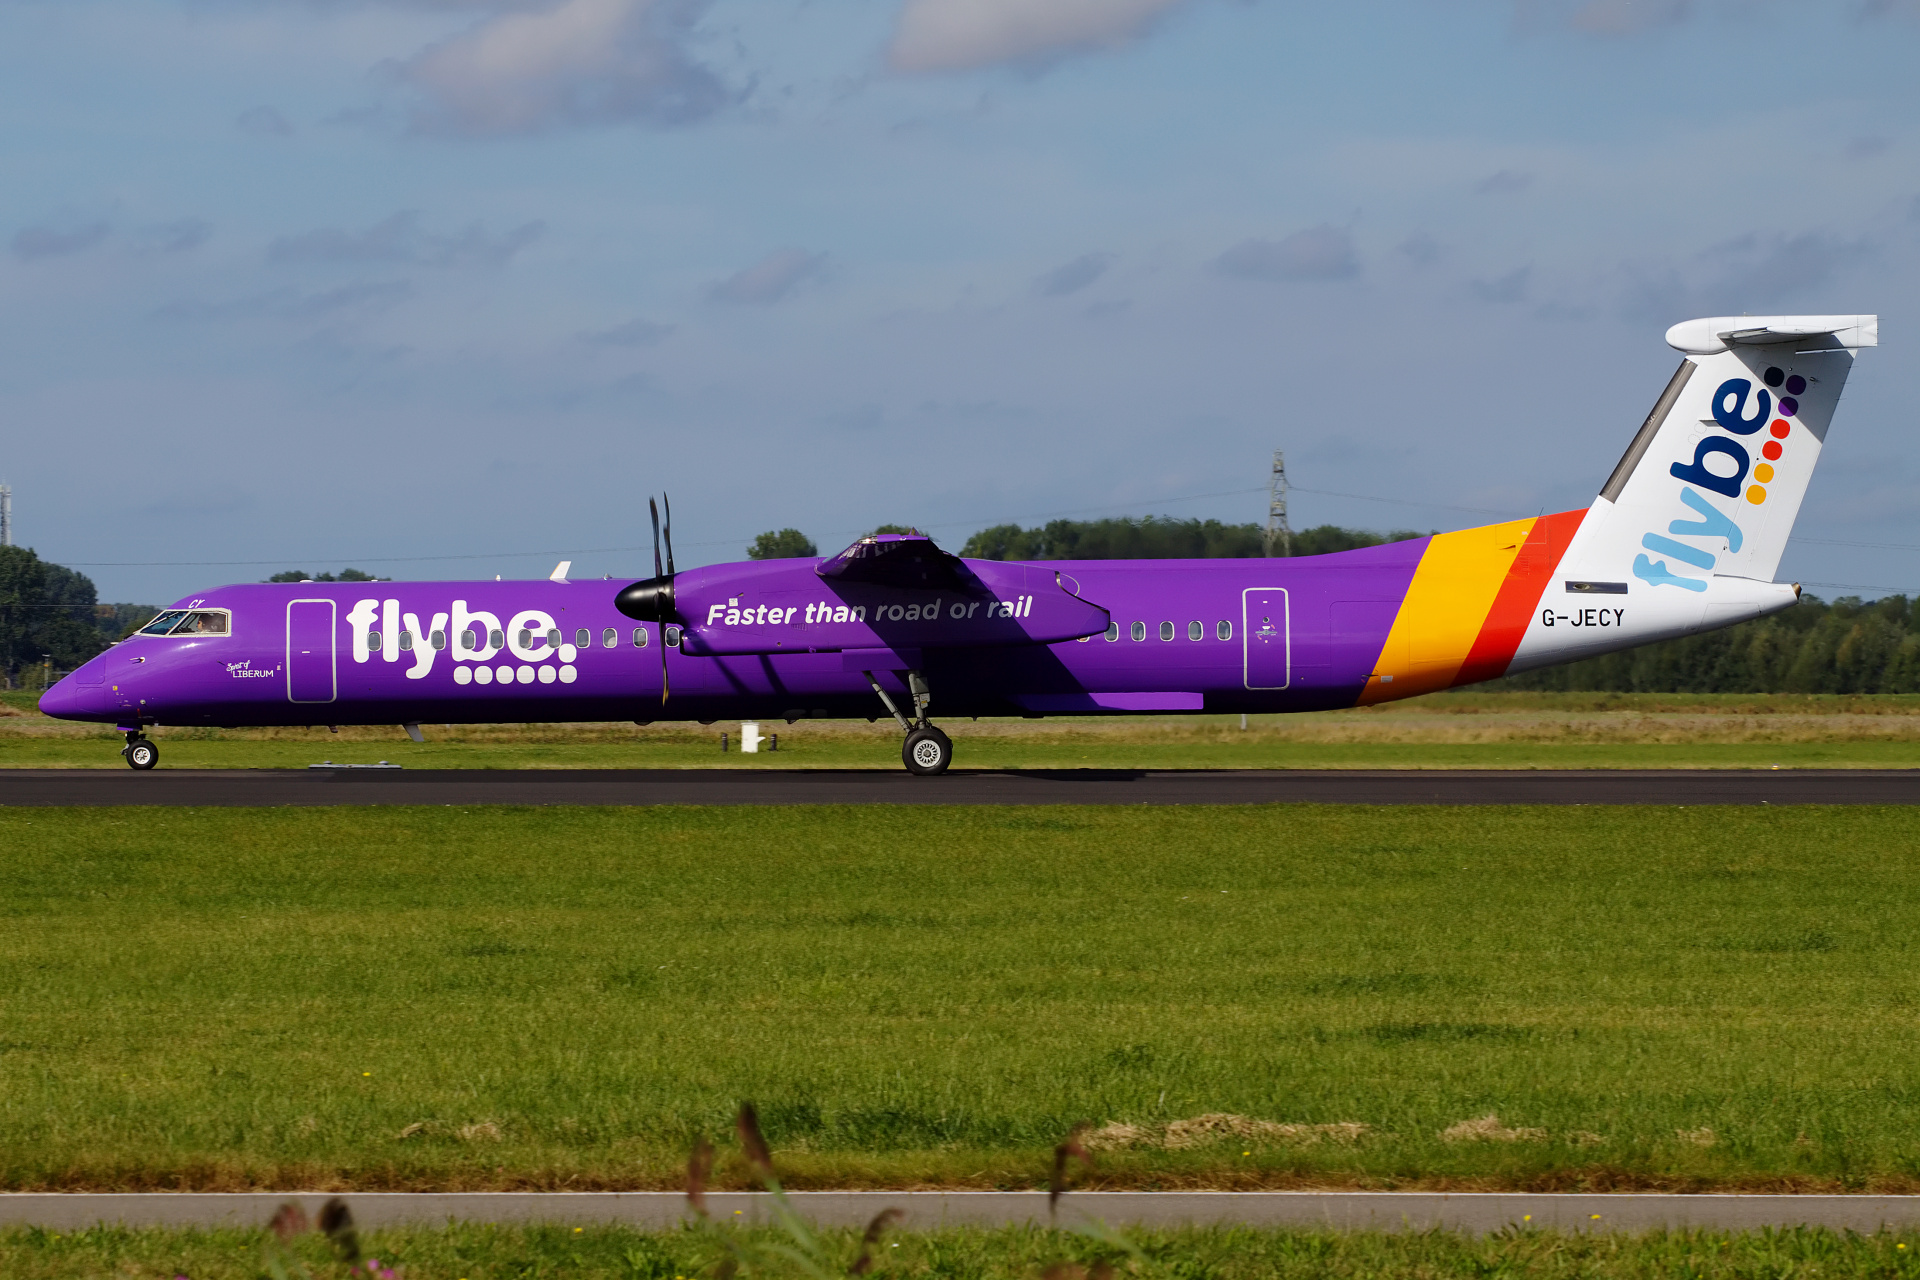 G-JECY (Aircraft » Schiphol Spotting » Bombardier Q400 Dash 8 » FlyBe)